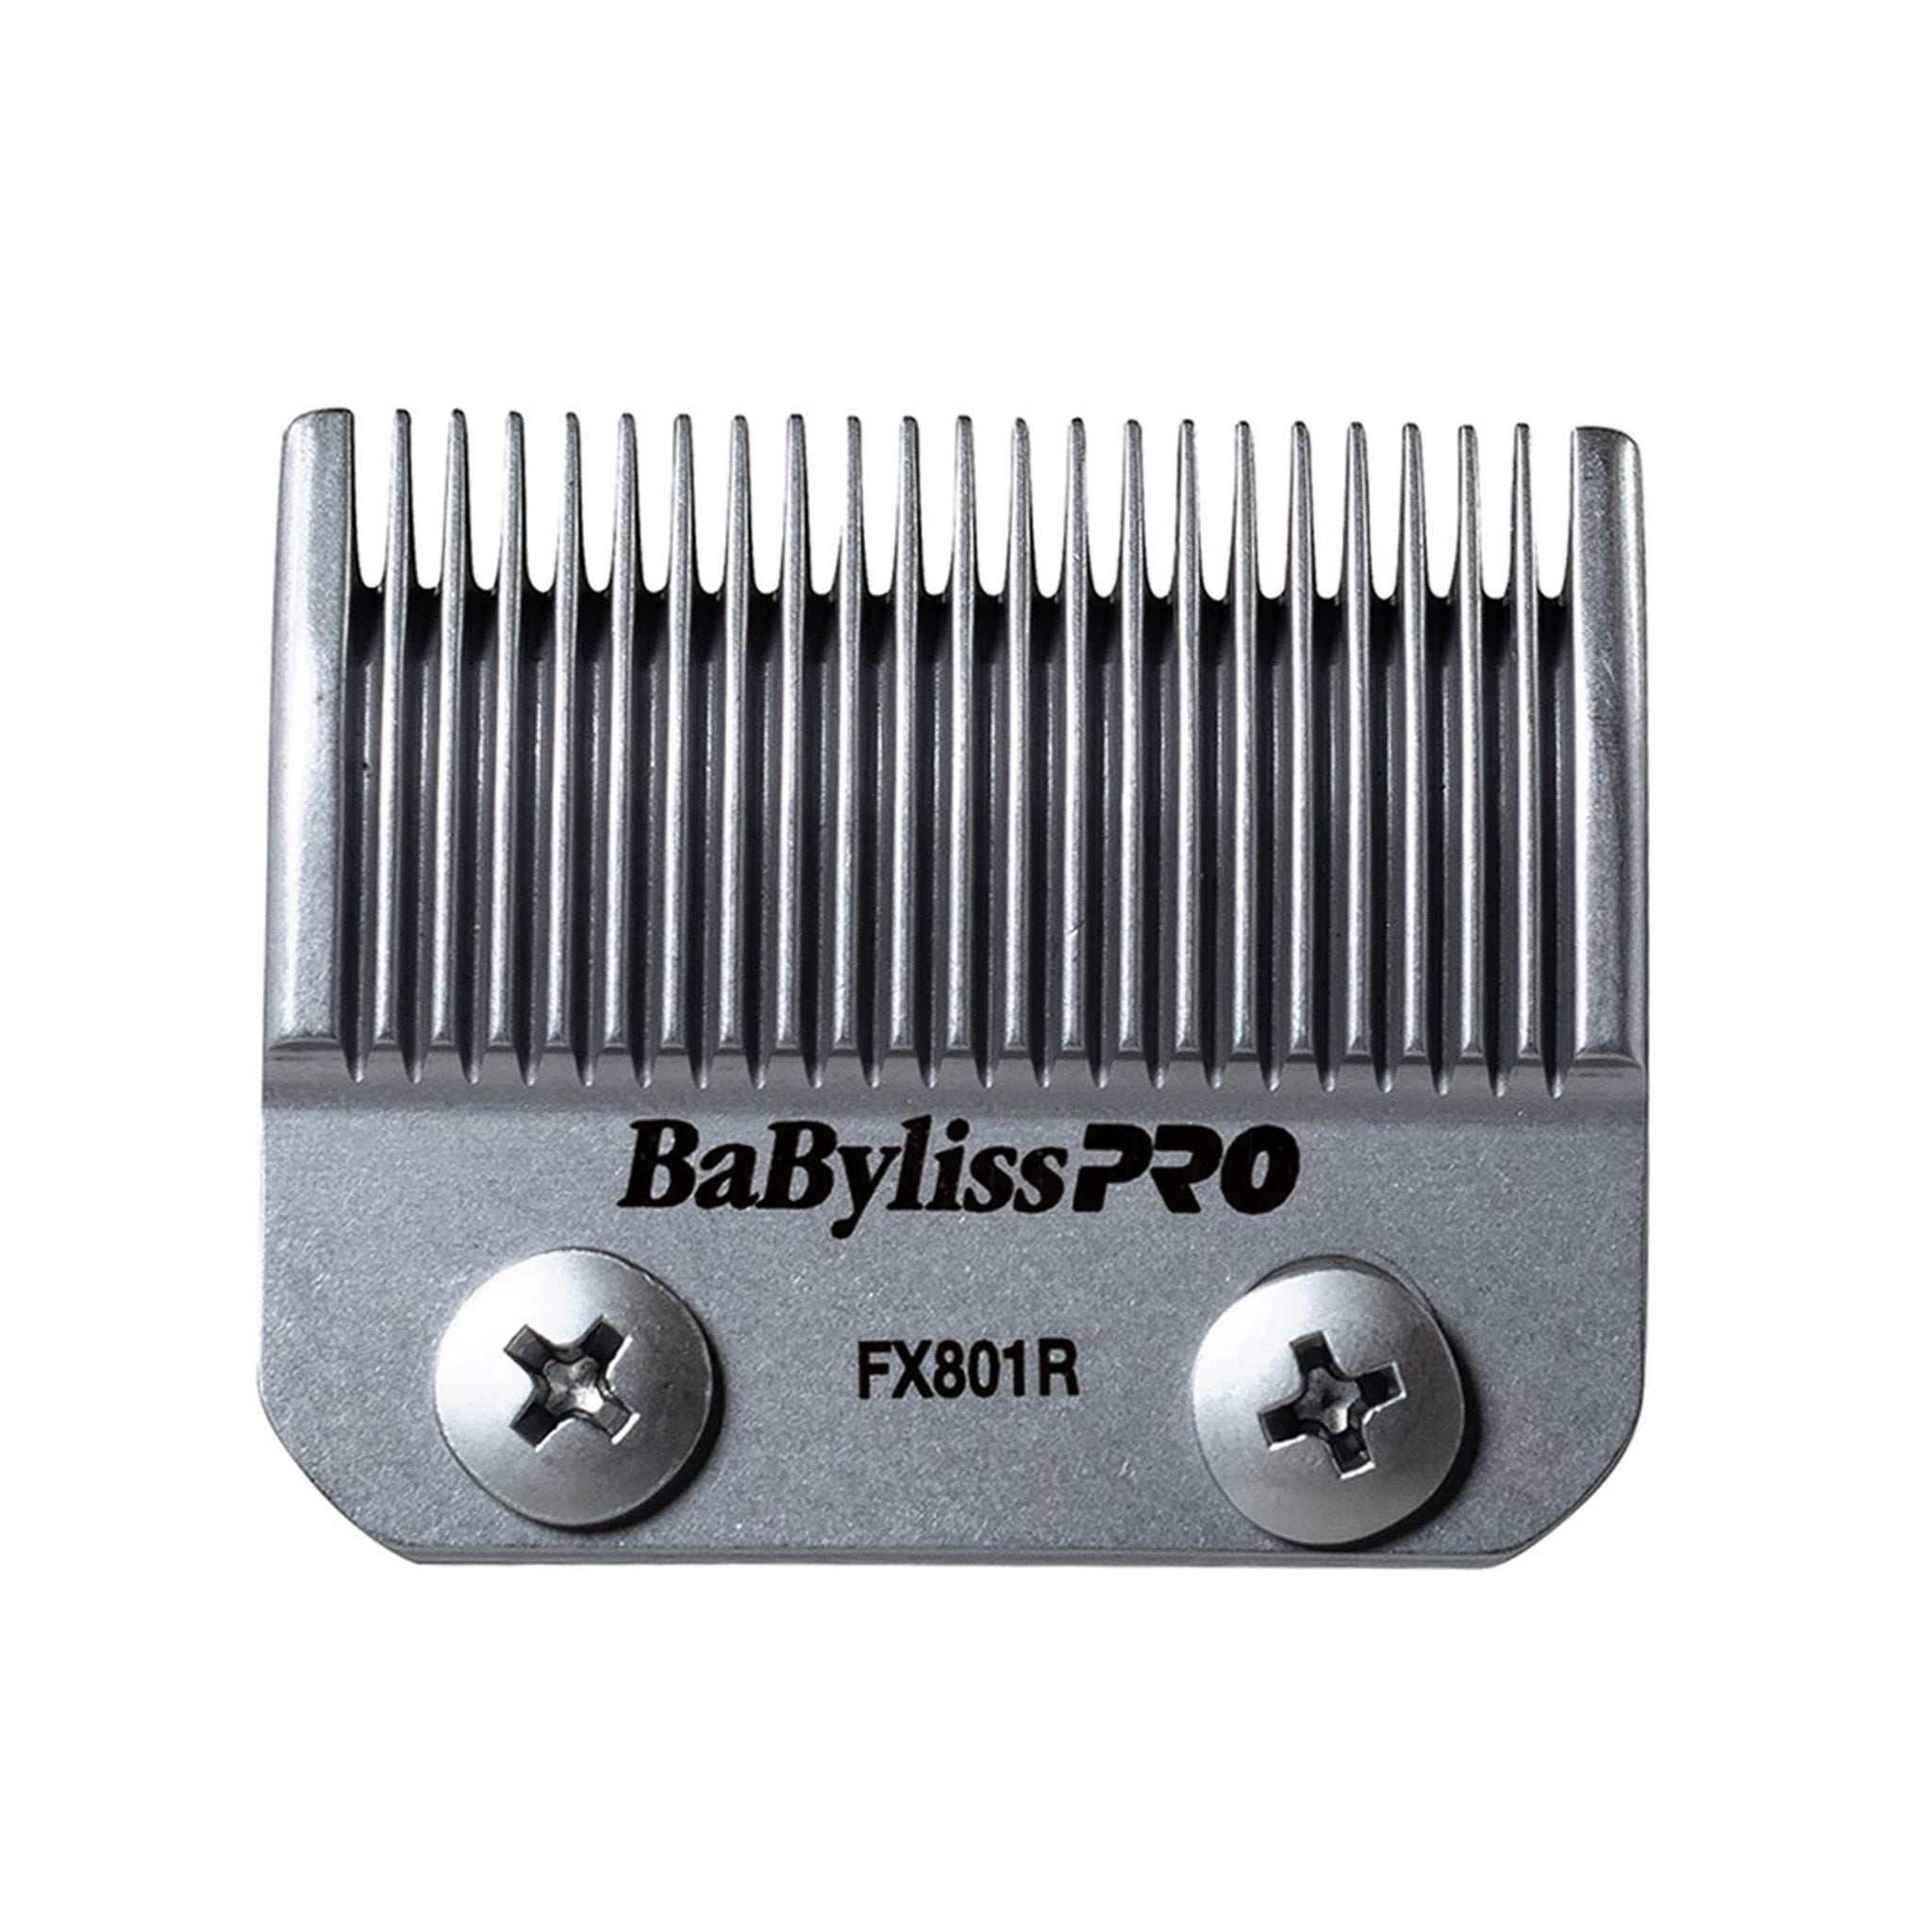 BabylissPRO Replacement Clipper Taper Blade Silver FX801R